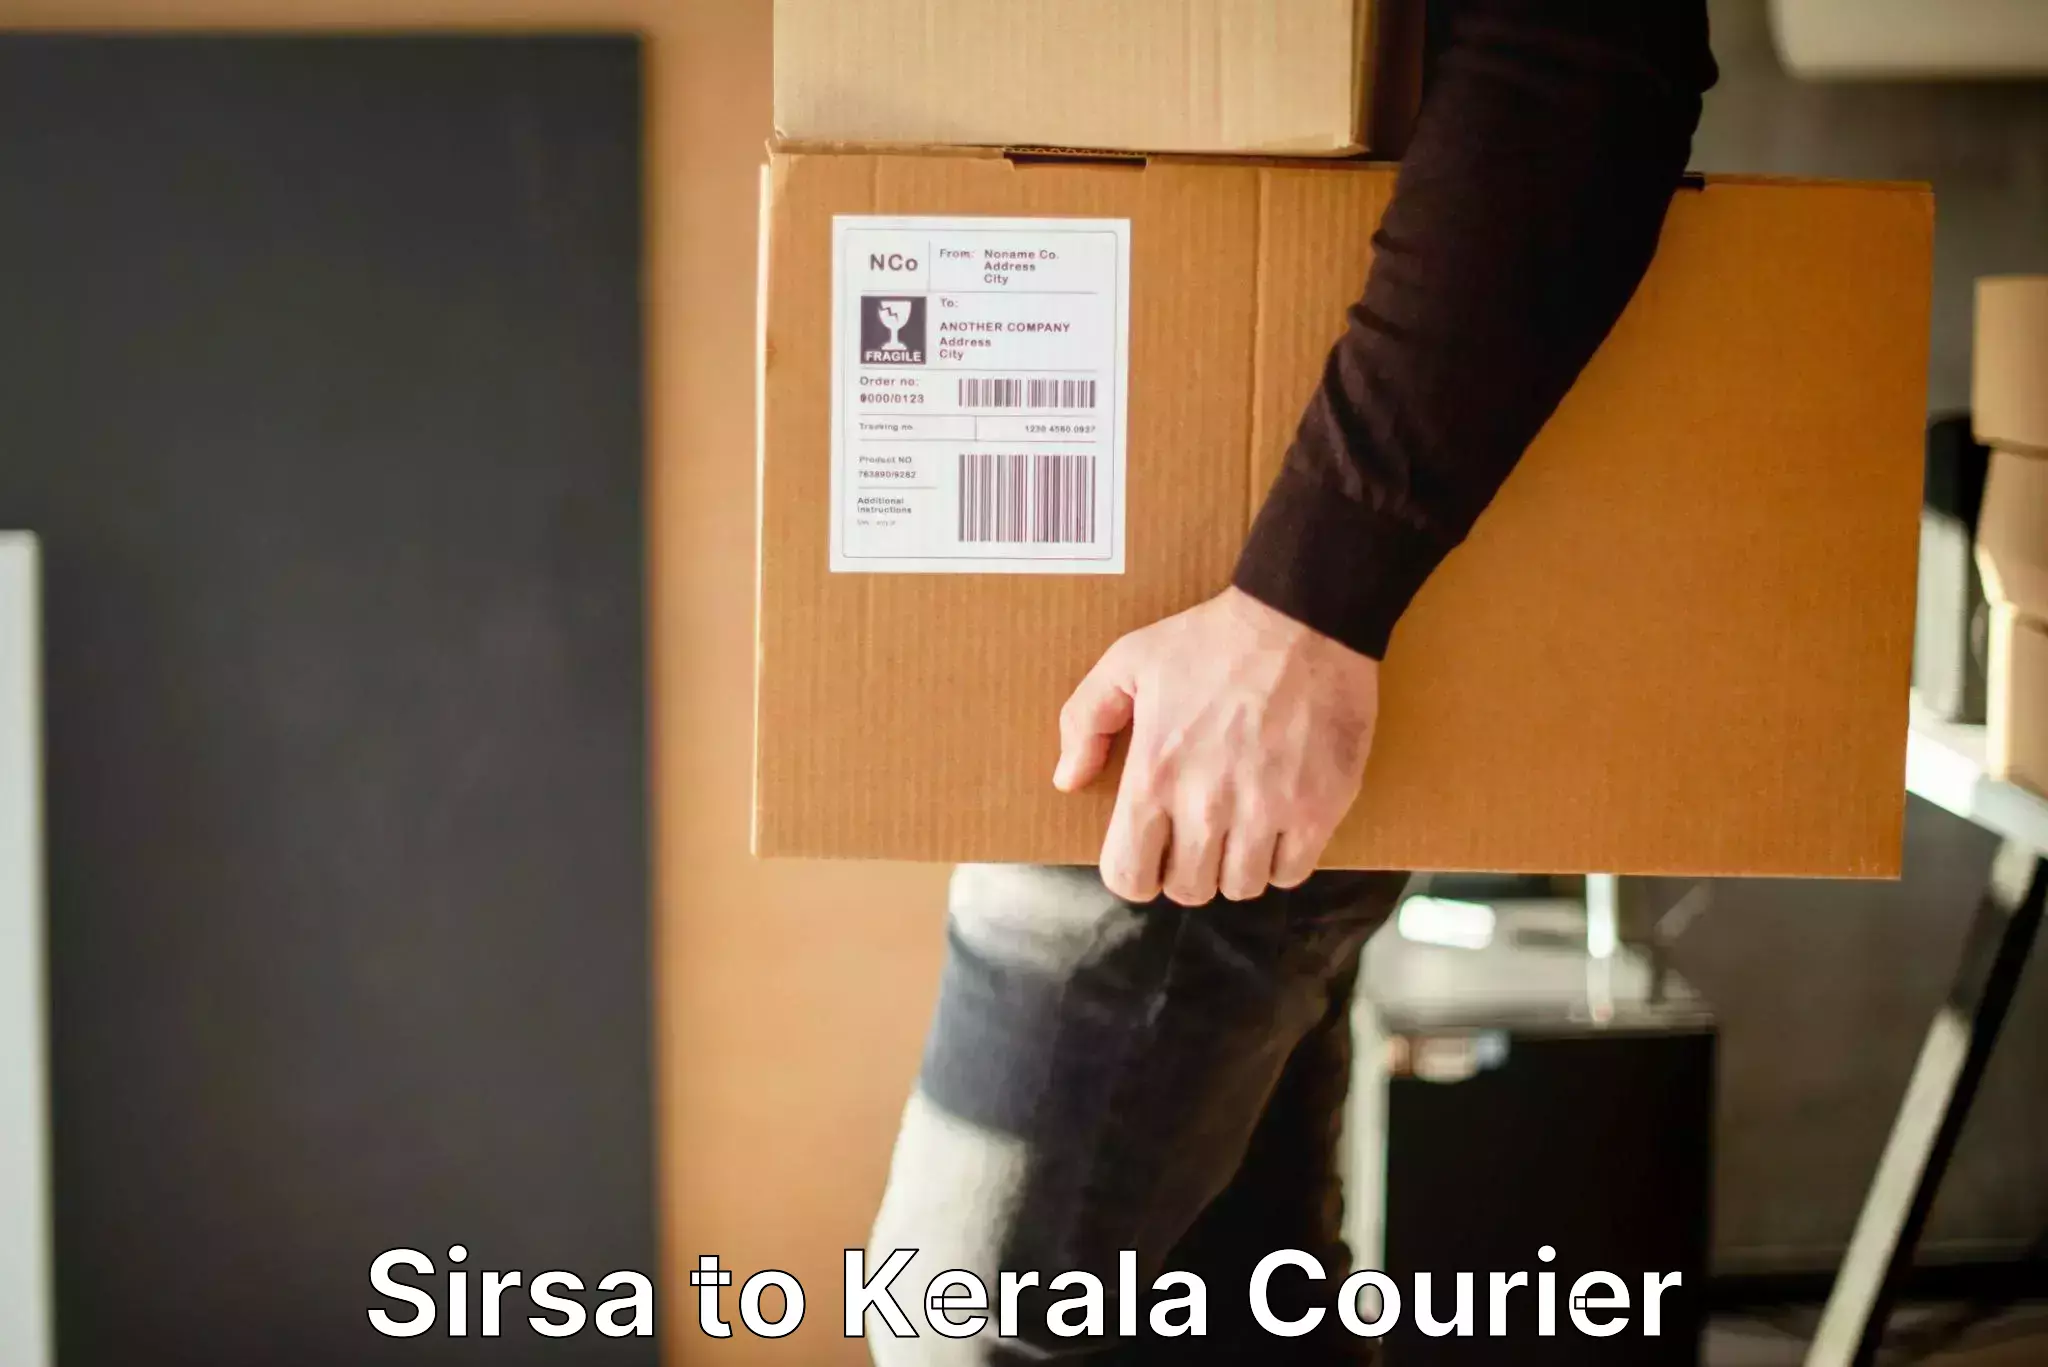 Luggage shipment specialists Sirsa to Kerala